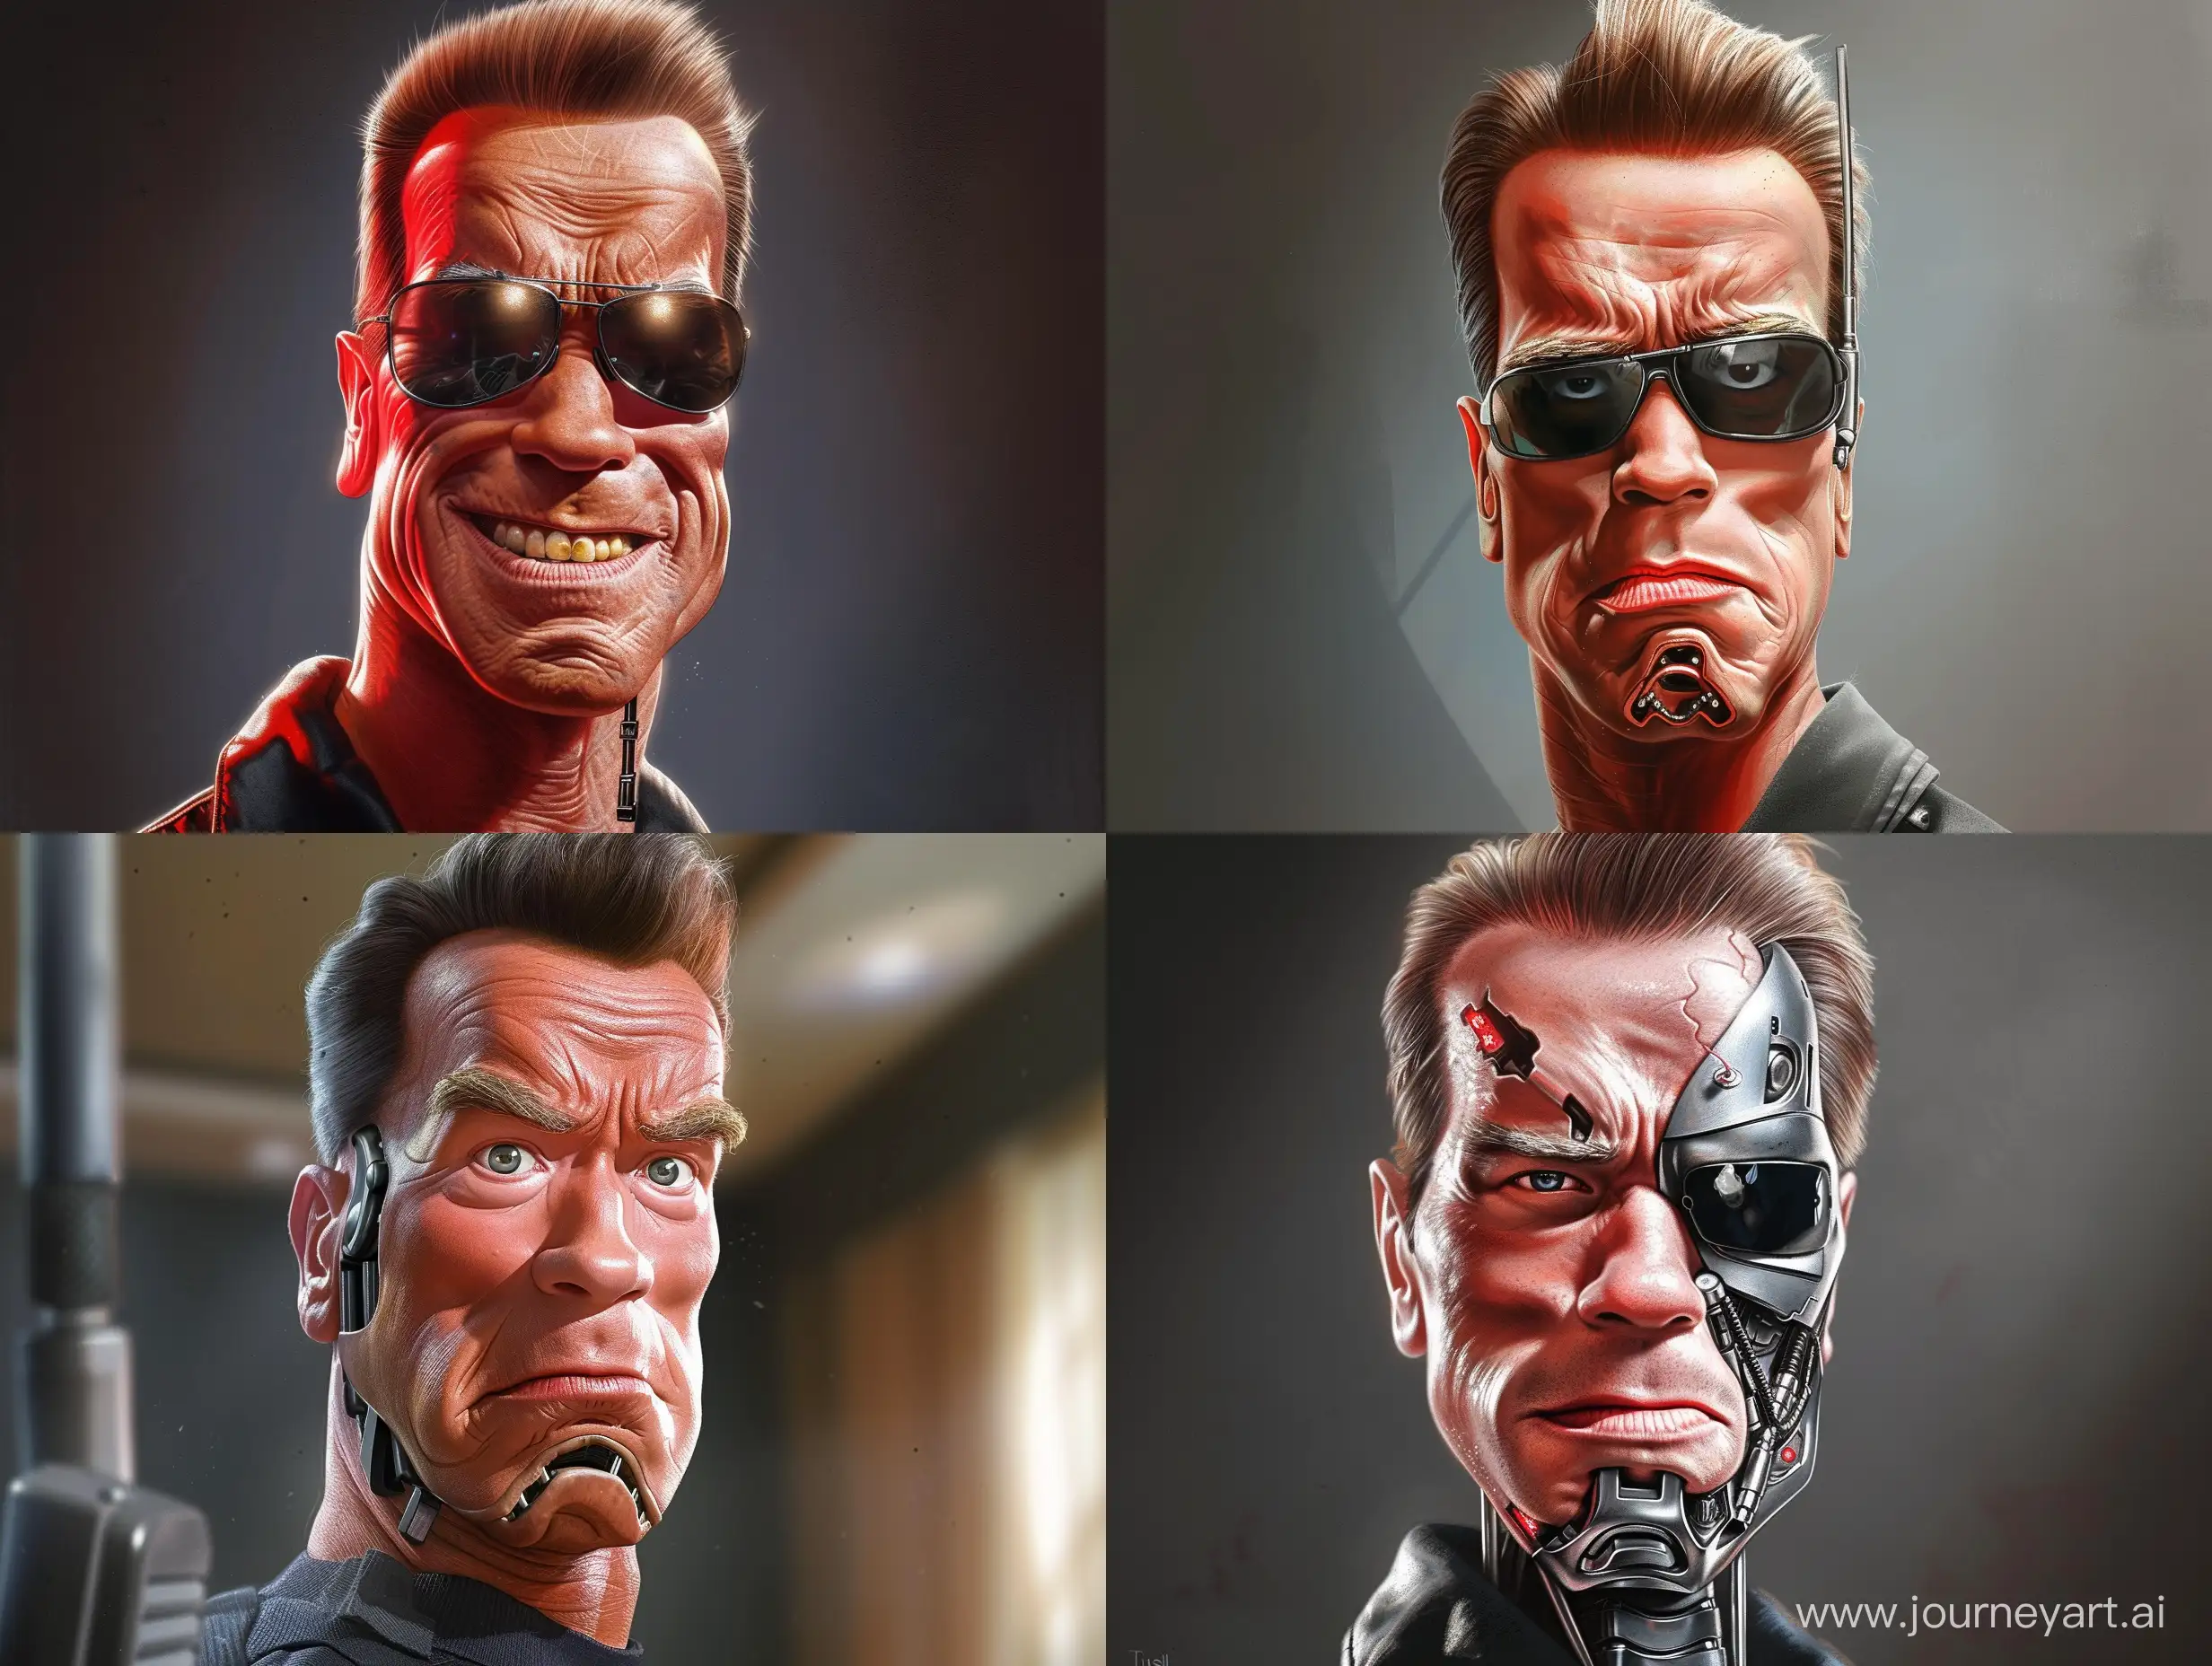 Arnold Schwarzenegger as Terminator by Tiago Hoisel's artistic work, whimsical, exaggerated style, reminiscent of humorous illustrations, humorously overstated Arnold Schwarzenegger, highlights whimsical, distinctive traits, uses caricature elements, lighthearted distortion, emphasizes comedic aspects of features